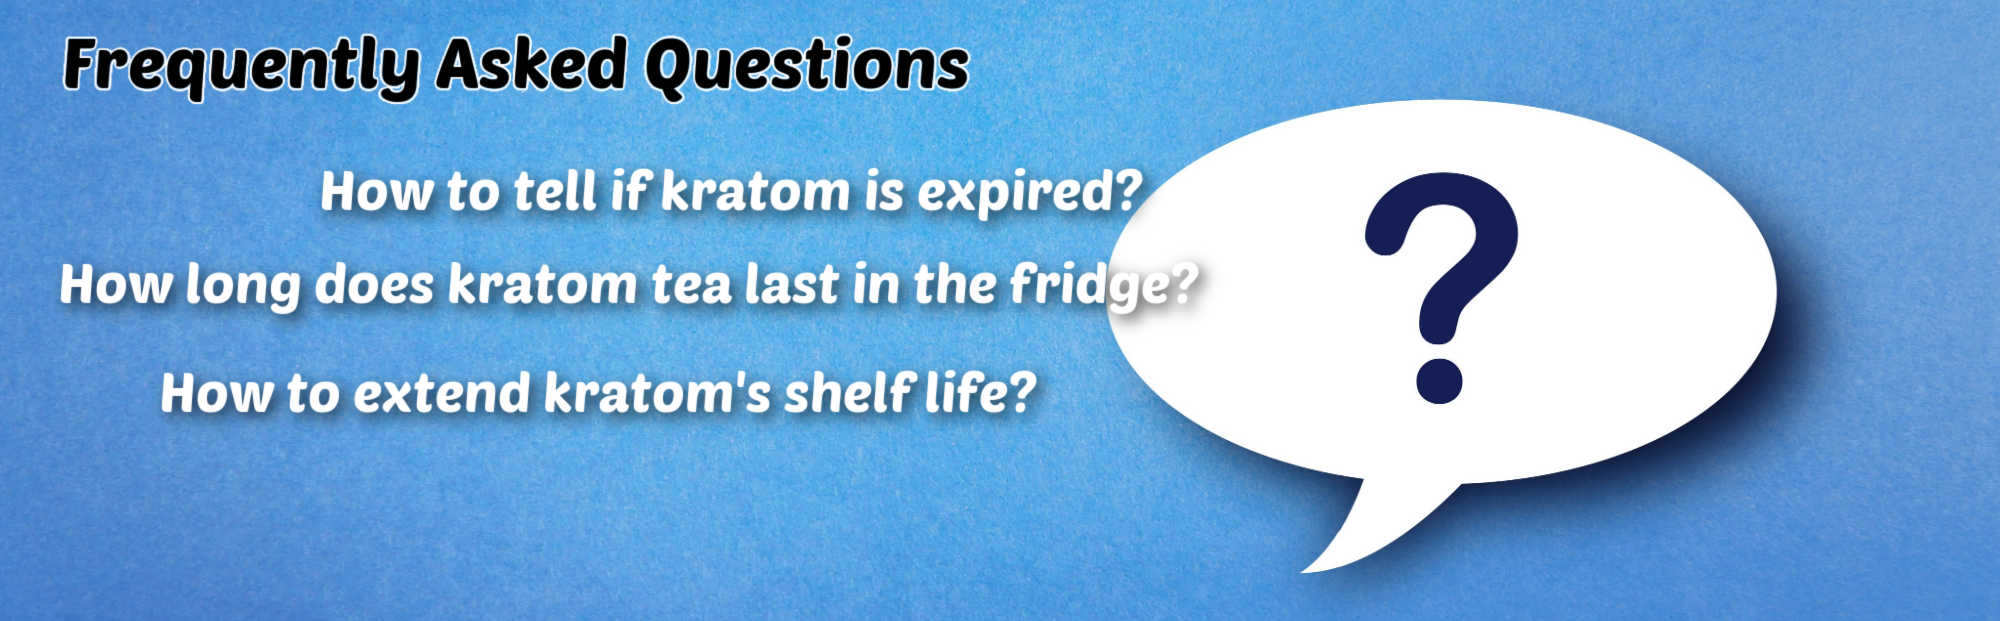 image of frequently asked questions about shelf life of kratom